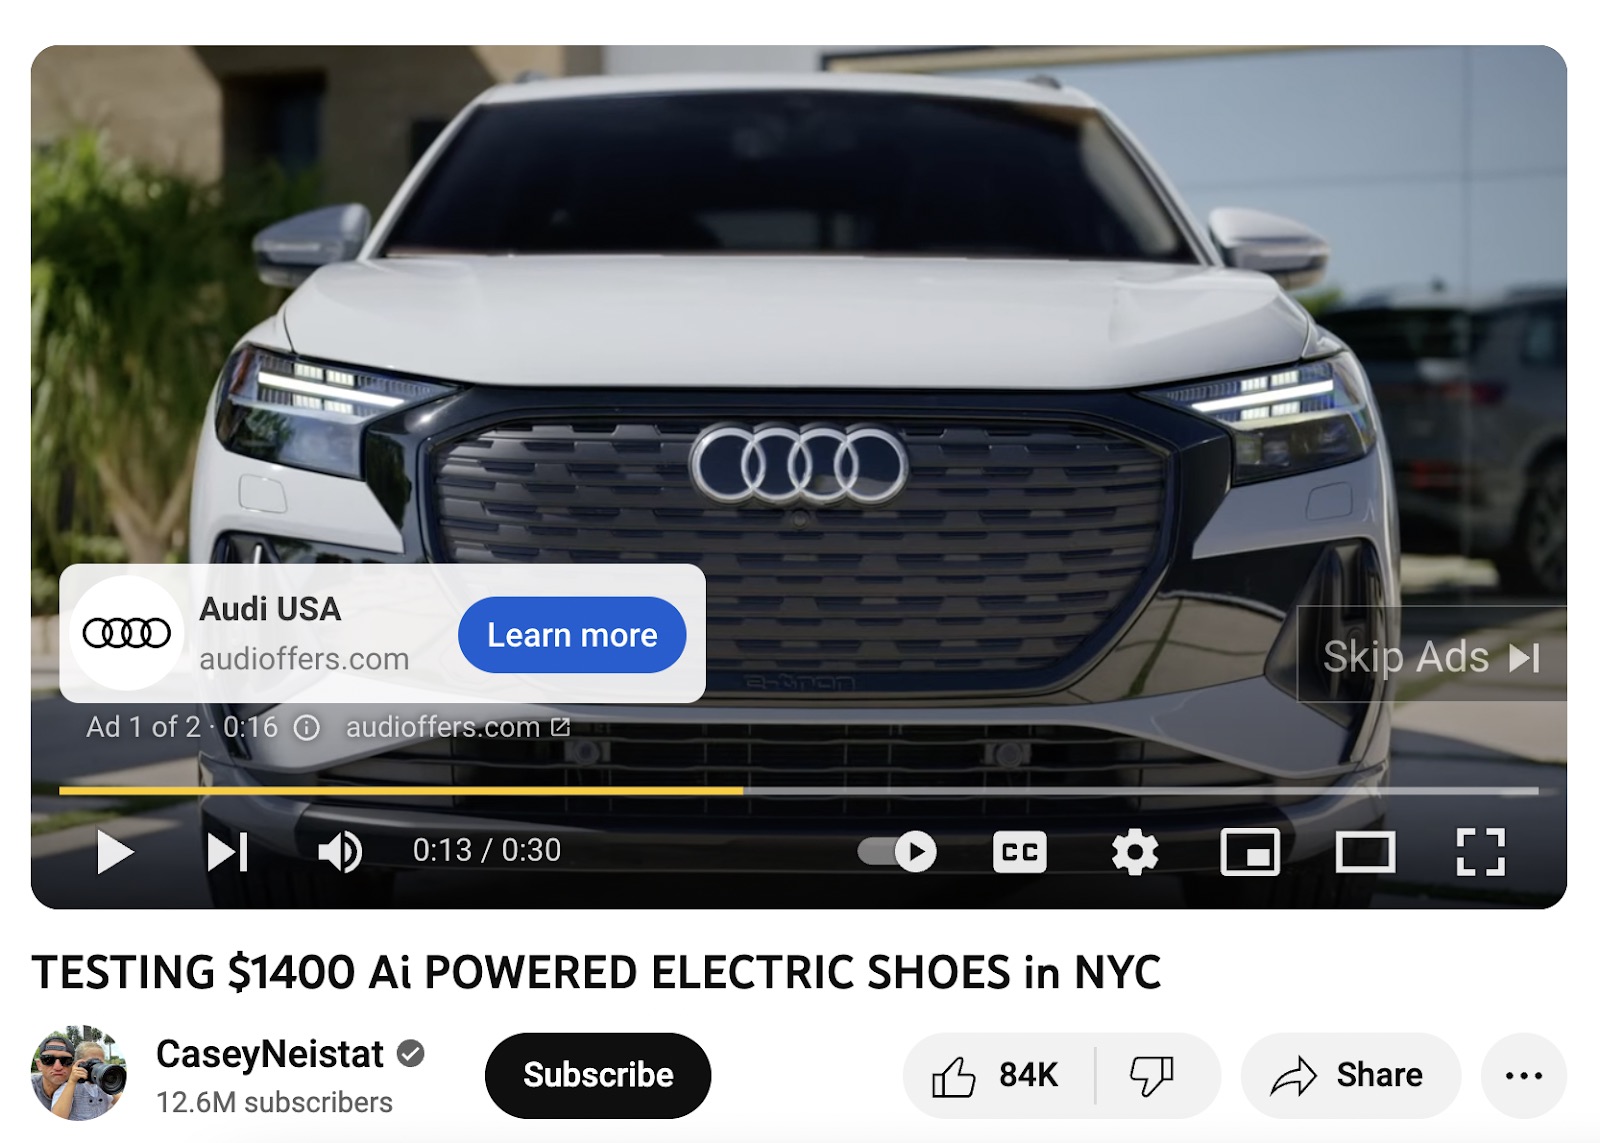 A video ad from Audi USA playing before the actual video from 'CaseyNeistat' on Youtube.